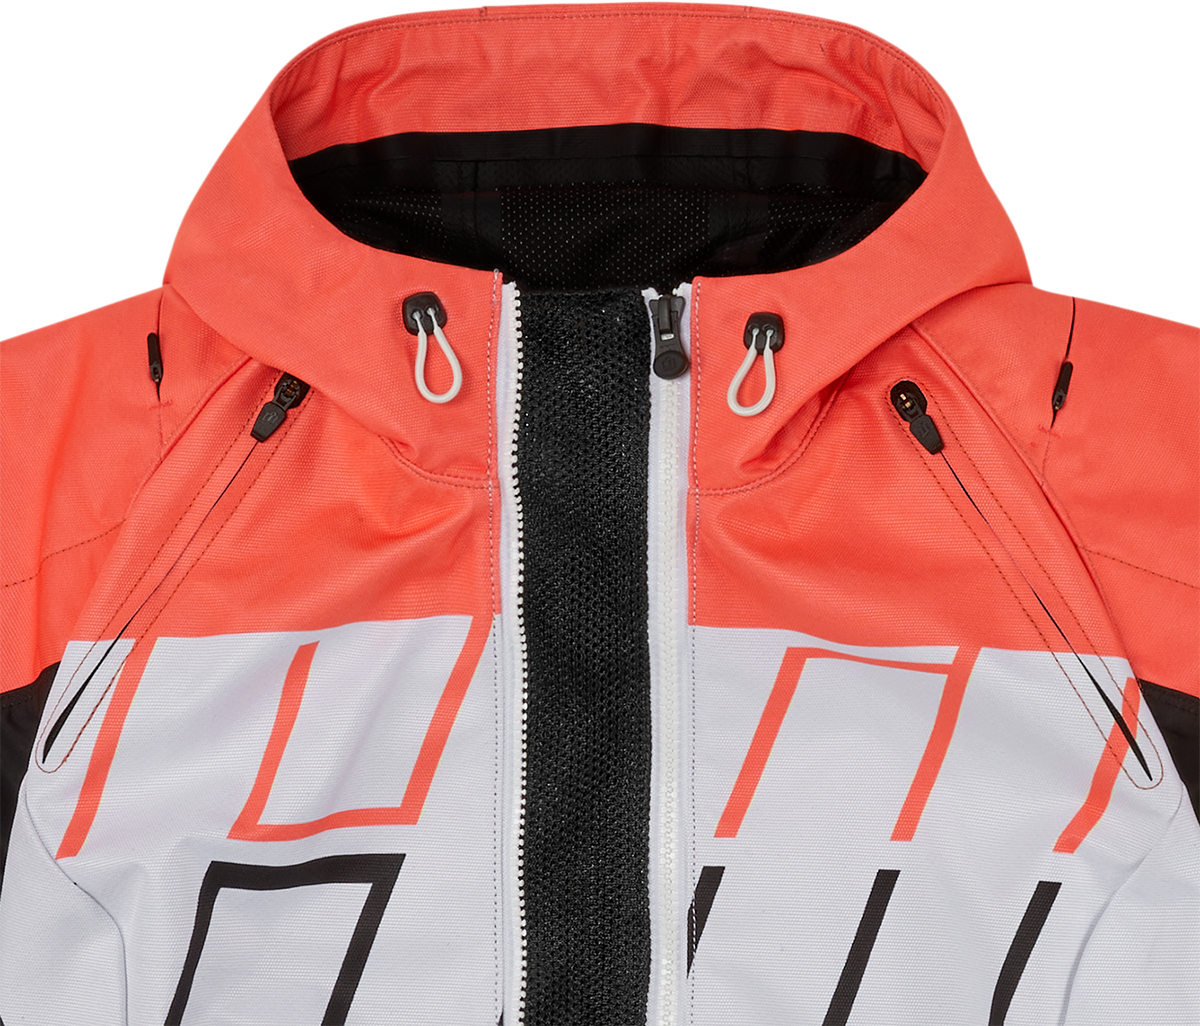 ICON Women's Airform Retro Jacket - Coral - Large 2822-1408